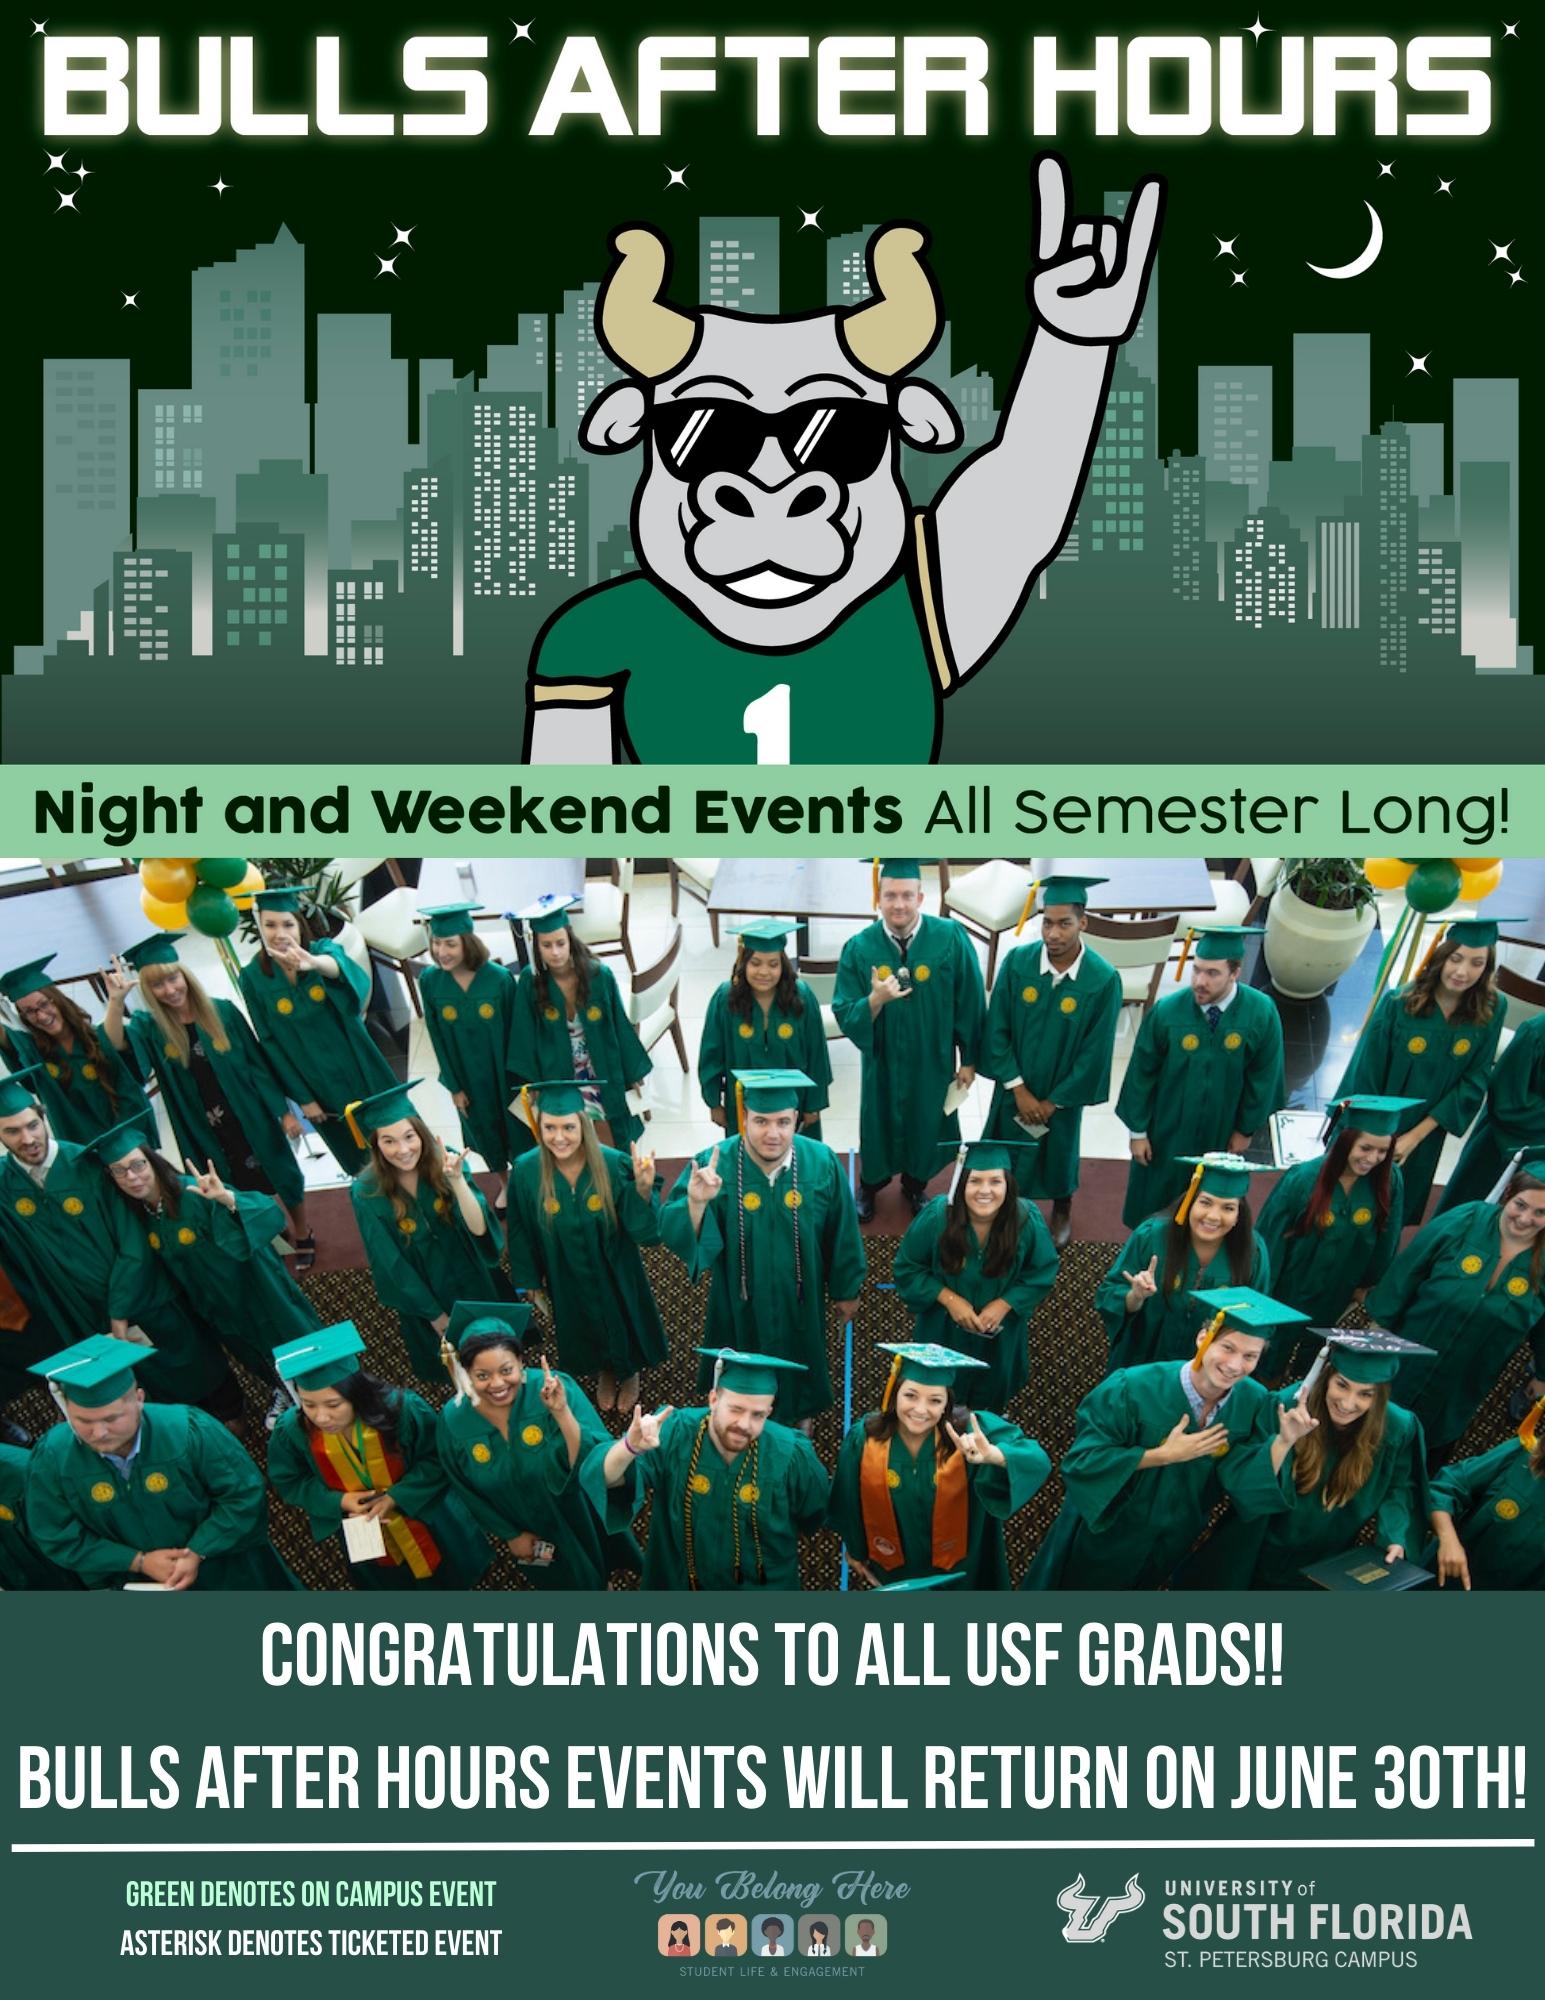 Bulls After Hours Weekend Events for March 10th to March 19th. Contact Jenelle Thompson at JenelleT@usf.edu for more information.